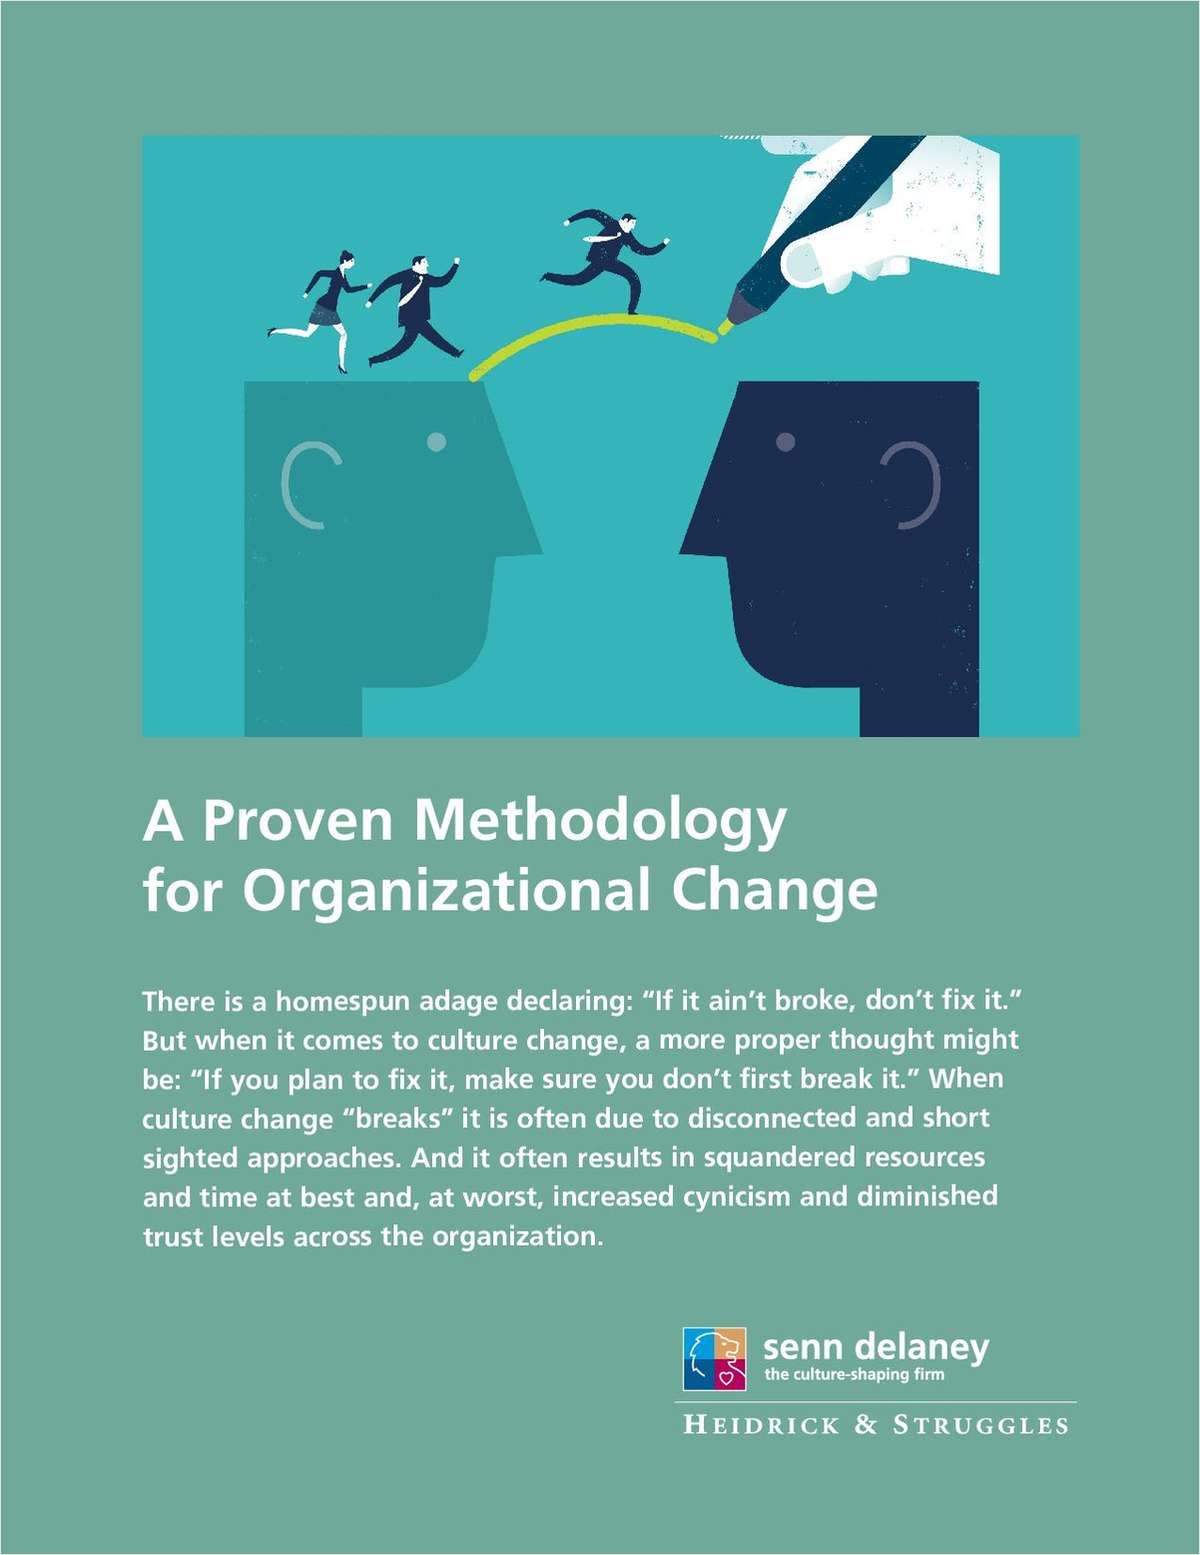 A Proven Methodology for Organizational Change